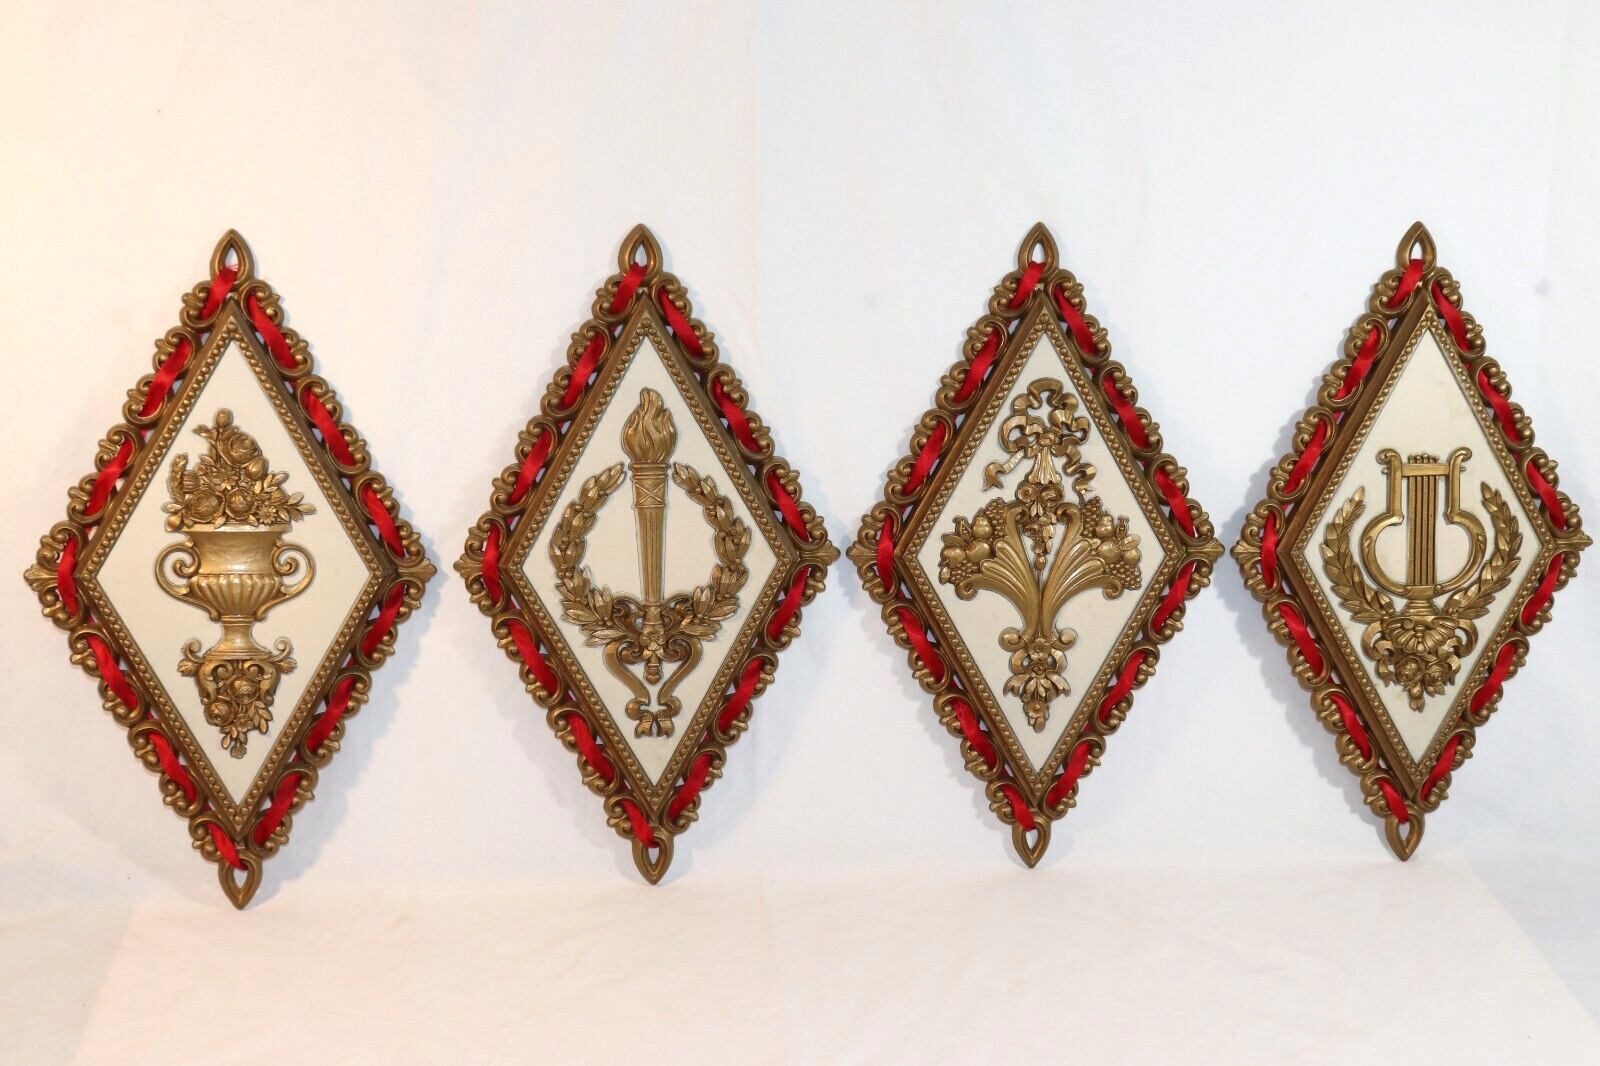 Homco Vintage Wall Plaques Gold w/ Red Diamond Shaped Hollywood Regency Set of 4